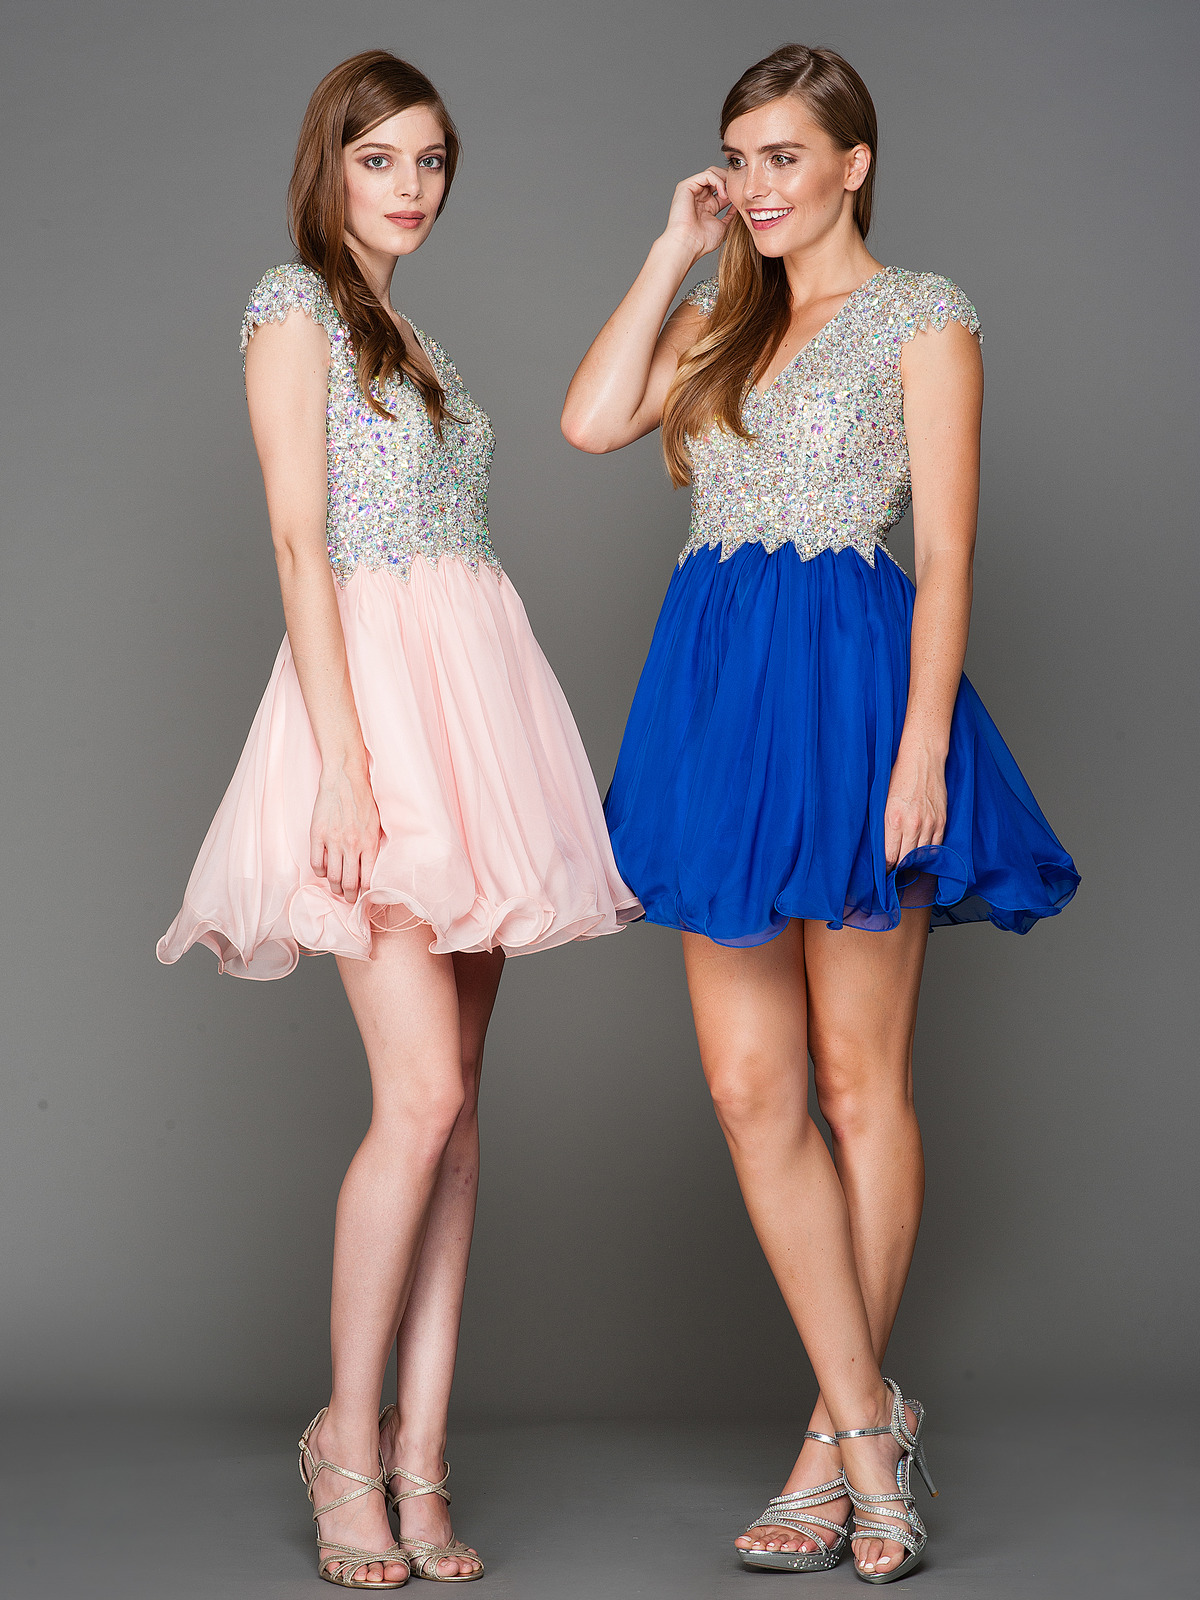 Cap Sleeves V Neck Jewel Top Homecoming Dress | Sung Boutique L.A.